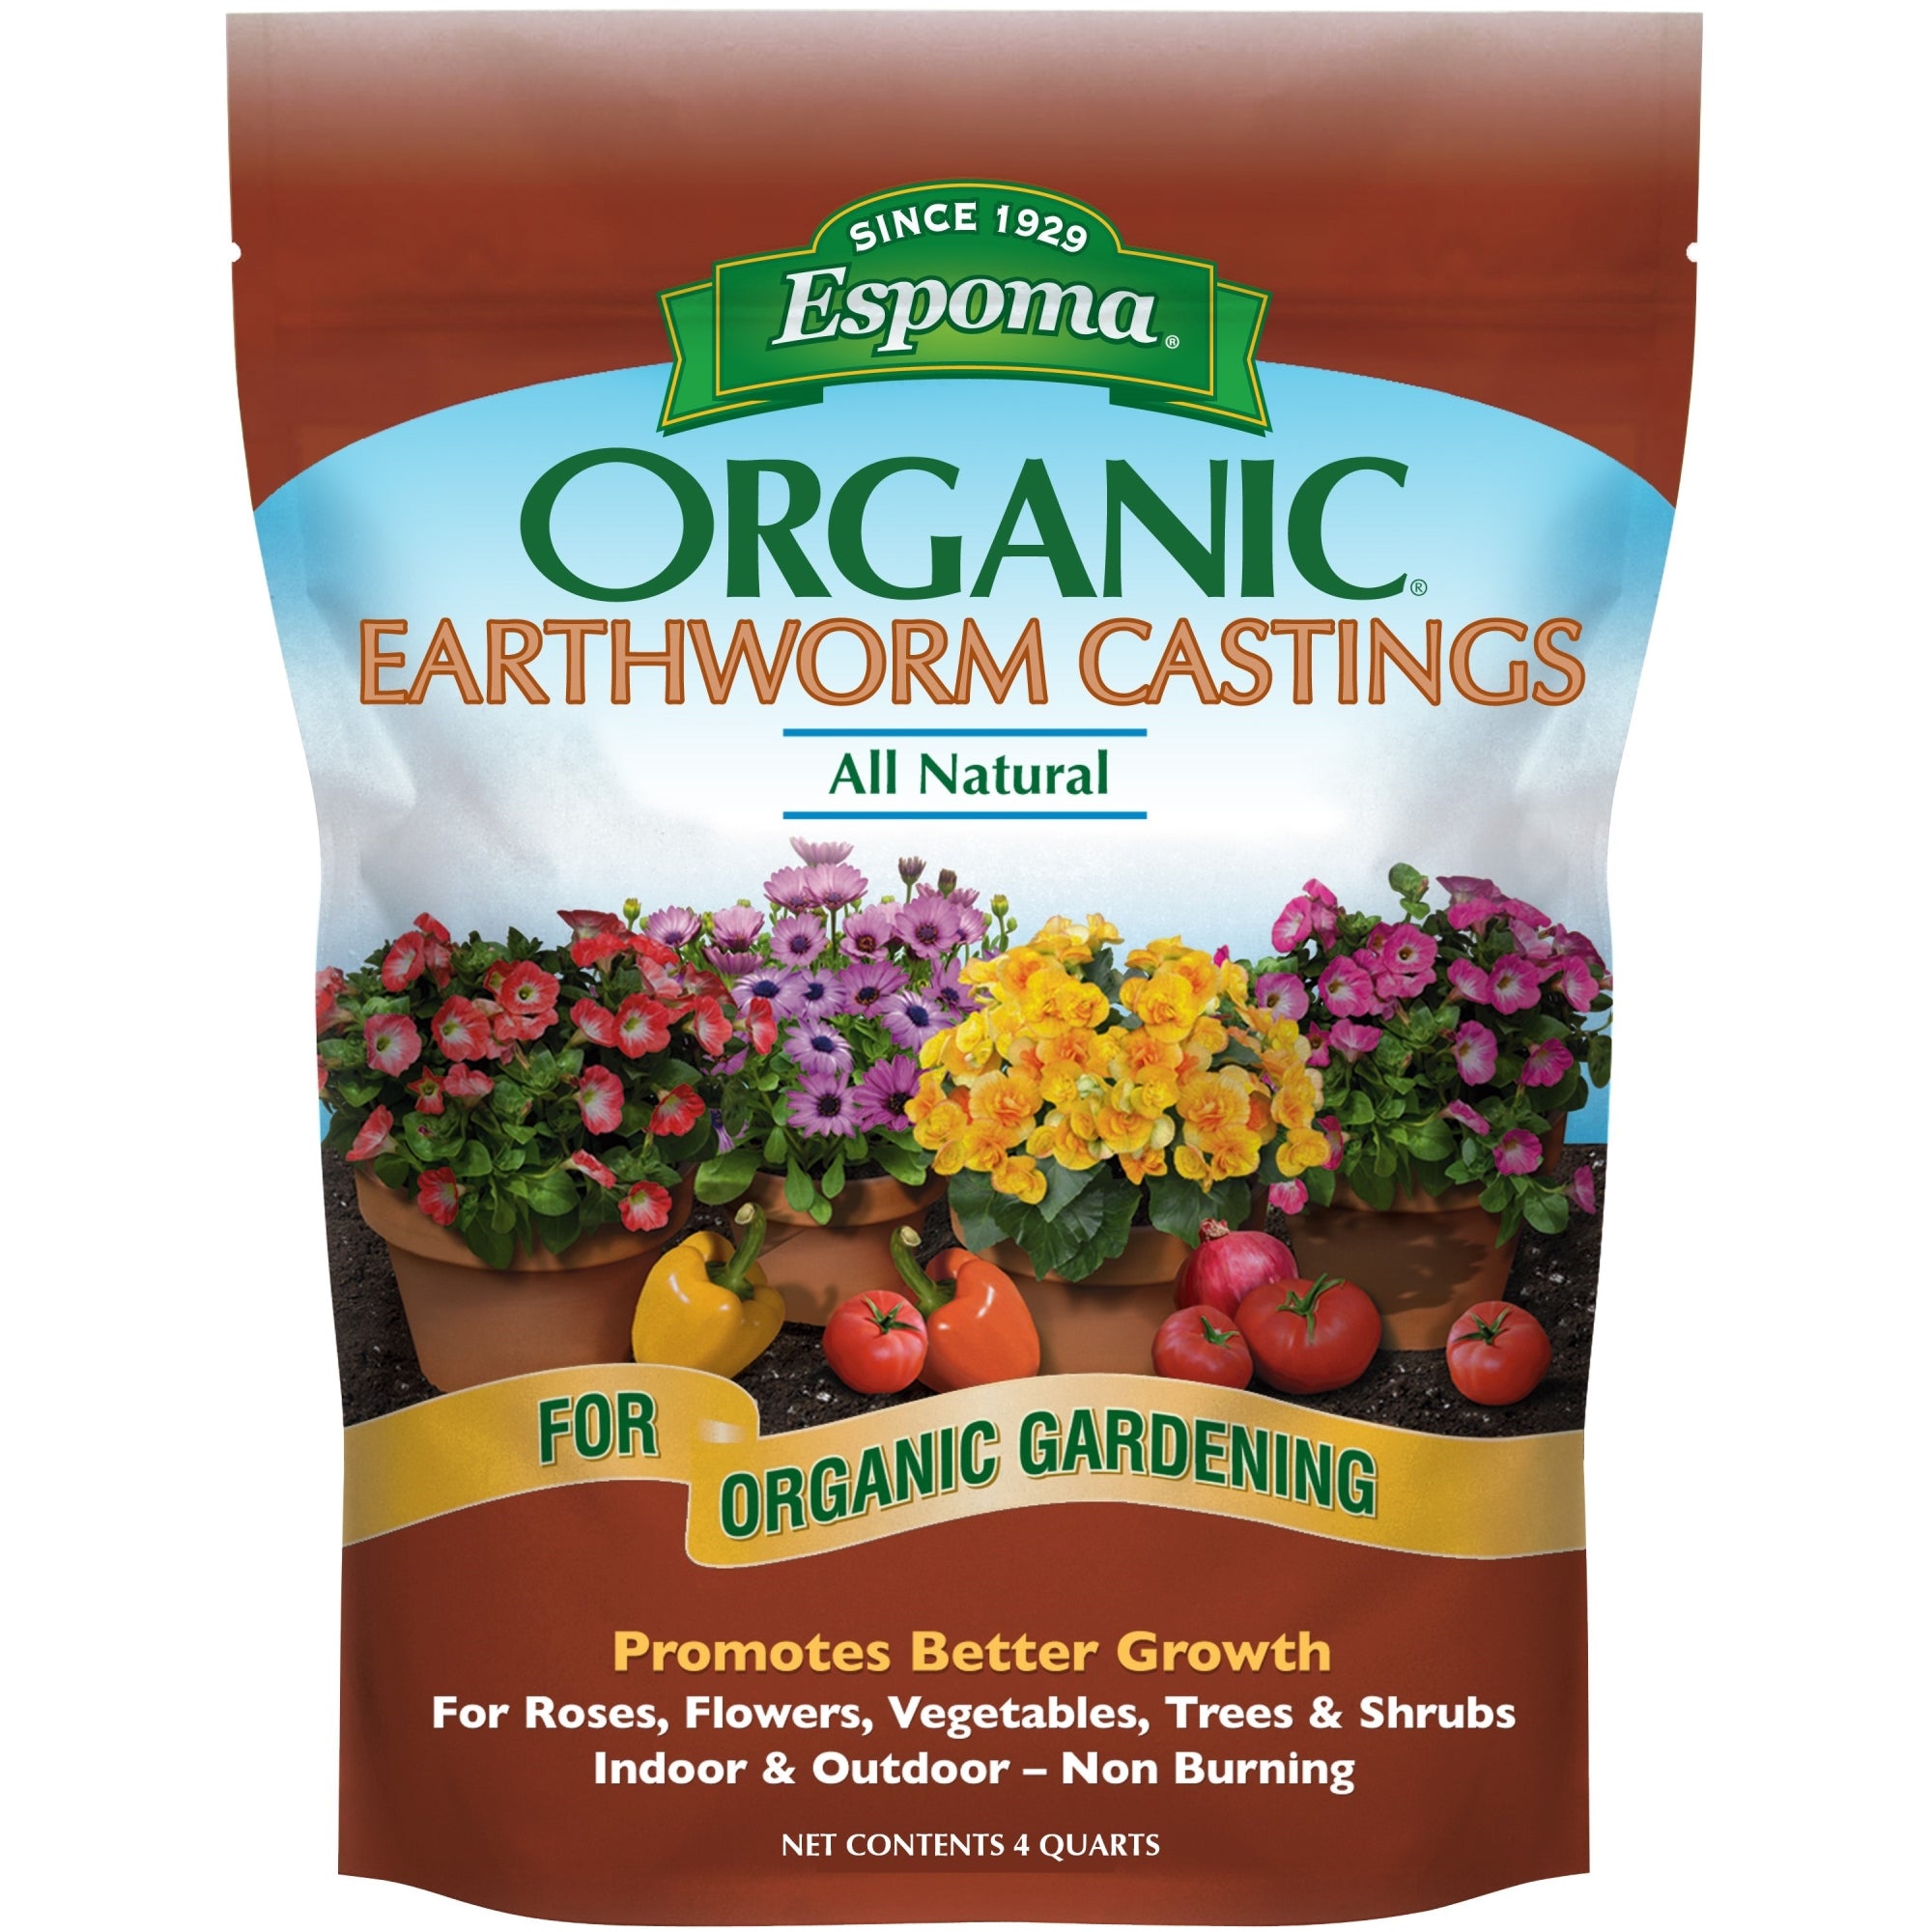 Espoma Organic Earthworm Castings All-Natural Plant Food for Indoor and Outdoor Plants, for Organic Gardening, 4 Qt Bag